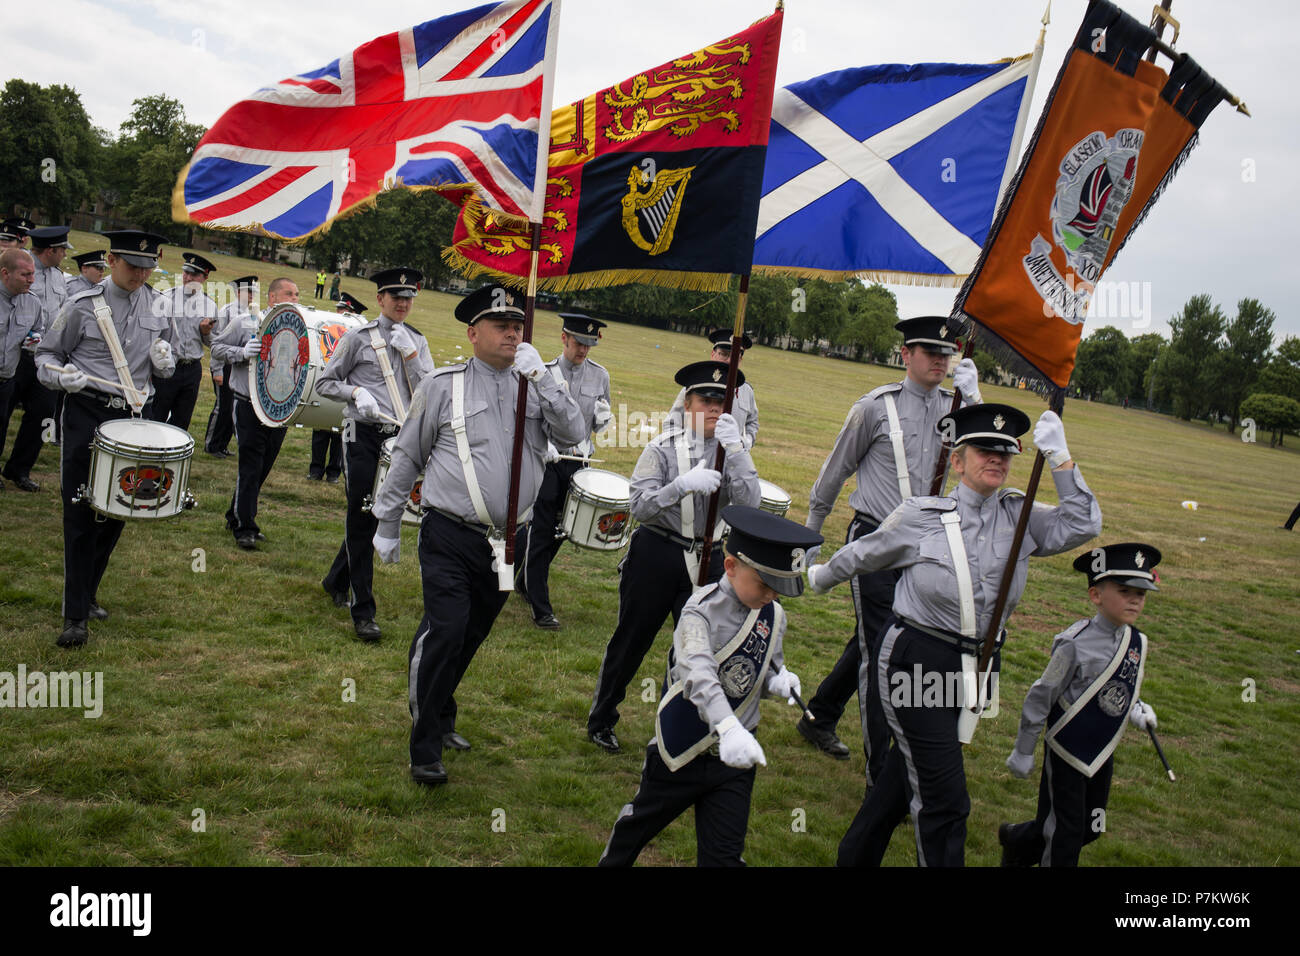 Glasgow, Scotland, on 7 July 2018. The annual Parade of Orange Order Lodge bands, organised by County Grand Orange Lodge of Glasgow.  The annual prade celebrates Prince William of Orange's victory over King James II at the Battle of the Boyne in 1690. Image Credit: Jeremy Sutton-Hibbert/Alamy Live News. Stock Photo